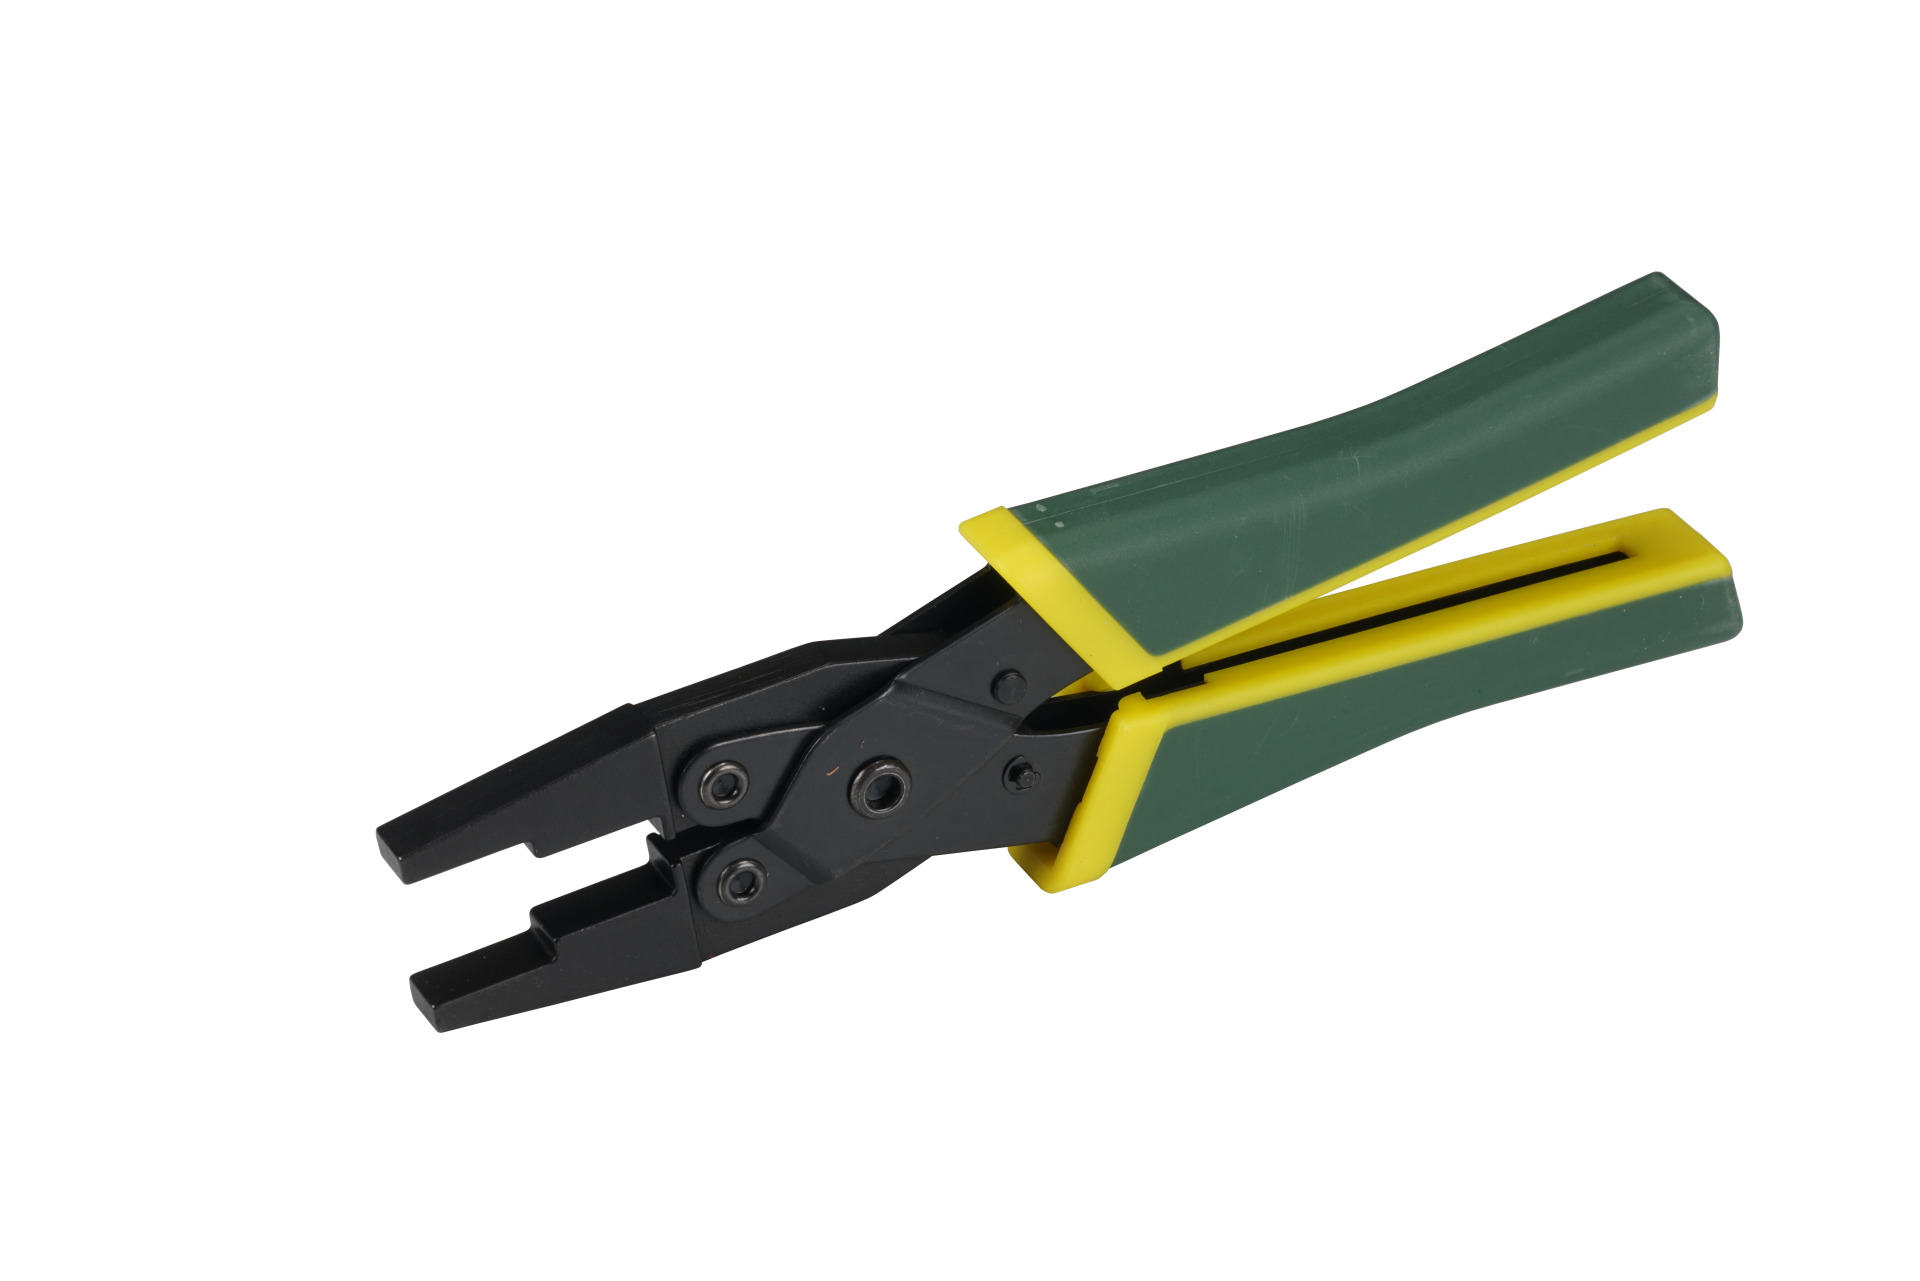 Network parallel pliers 11 - 32mm, for assembling keystones and field connectors